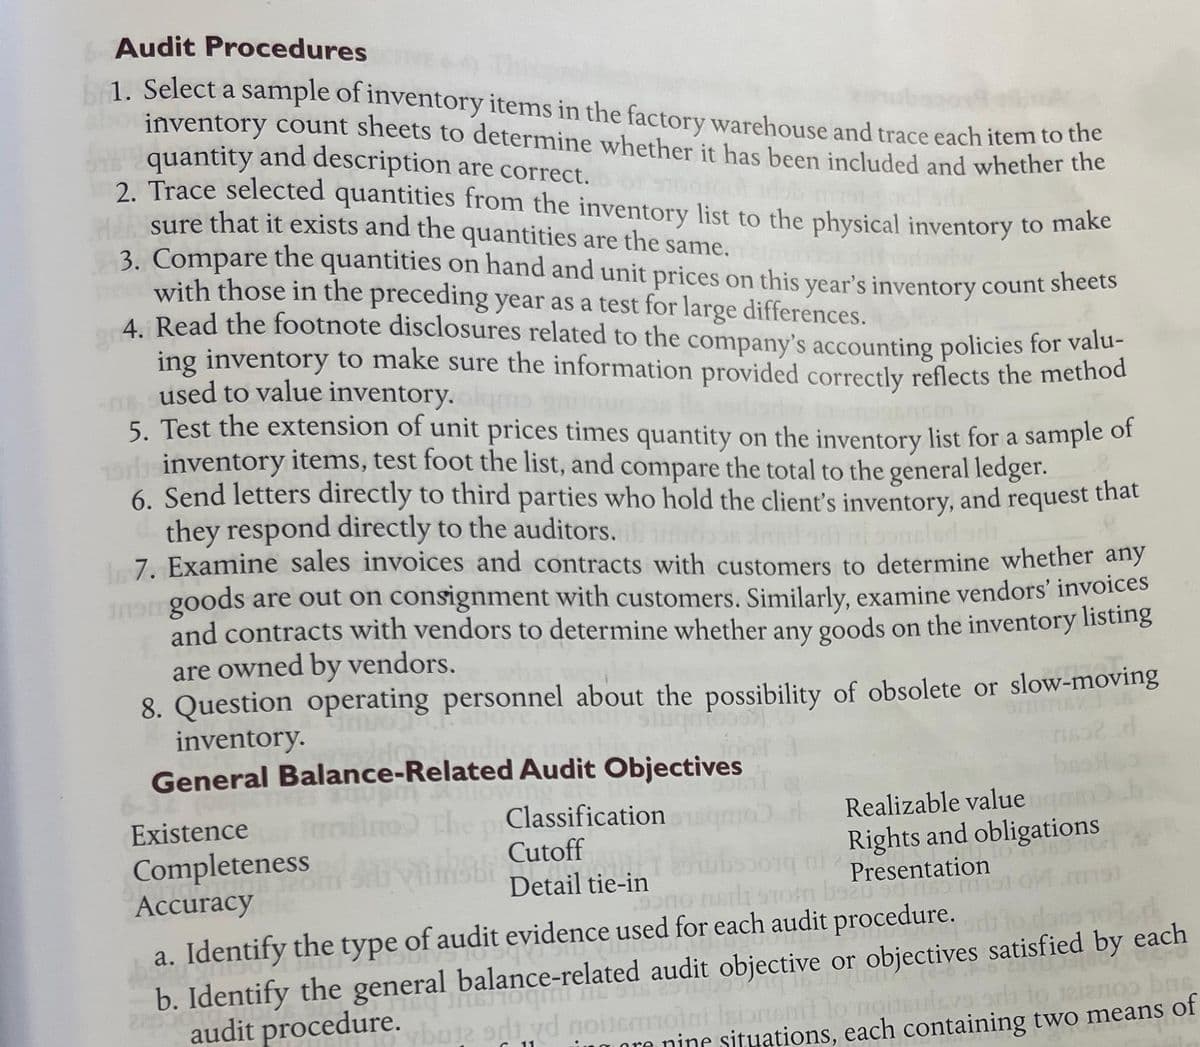 Audit Procedures
1. Select a sample of inventory items in the factory warehouse and trace each item to the
inventory count sheets to determine whether it has been included and whether the
quantity and description are correct.
2. Trace selected quantities from the inventory list to the physical inventory to make
sure that it exists and the quantities are the same.
3. Compare the quantities on hand and unit prices on this year's inventory count sheets
with those in the preceding year as a test for large differences.
4. Read the footnote disclosures related to the company's accounting policies for valu-
ing inventory to make sure the information provided correctly reflects the method
used to value inventory.
5. Test the extension of unit prices times quantity on the inventory list for a sample of
inventory items, test foot the list, and compare the total to the general ledger.
that
6. Send letters directly to third parties who hold the client's inventory, and request
they respond directly to the auditors.
17. Examine sales invoices and contracts with customers to determine whether any
inom goods are out on consignment with customers. Similarly, examine vendors' invoices
and contracts with vendors to determine whether any goods on the inventory listing
are owned by vendors.
8. Question operating personnel about the possibility of obsolete or slow-moving
inventory.
d
General Balance-Related Audit Objectives
The piClassification
Cutoff
Detail tie-in
Existence
Completeness
Accuracy
Realizable value
Rights and obligations
091569 101
Presentation
bseu 90 1183
bsau
9000 mort
om
a. Identify the type of audit evidence used for each audit procedure.
b. Identify the general balance-related audit objective or objectives satisfied by each
20 audit procedure.
JIST
Cavaly 06-0
THE 916 2910
op bas
Isiontent to nousulsys.srh to
vbuje odi yd noilemm
igore nine situations, each containing two means of
11